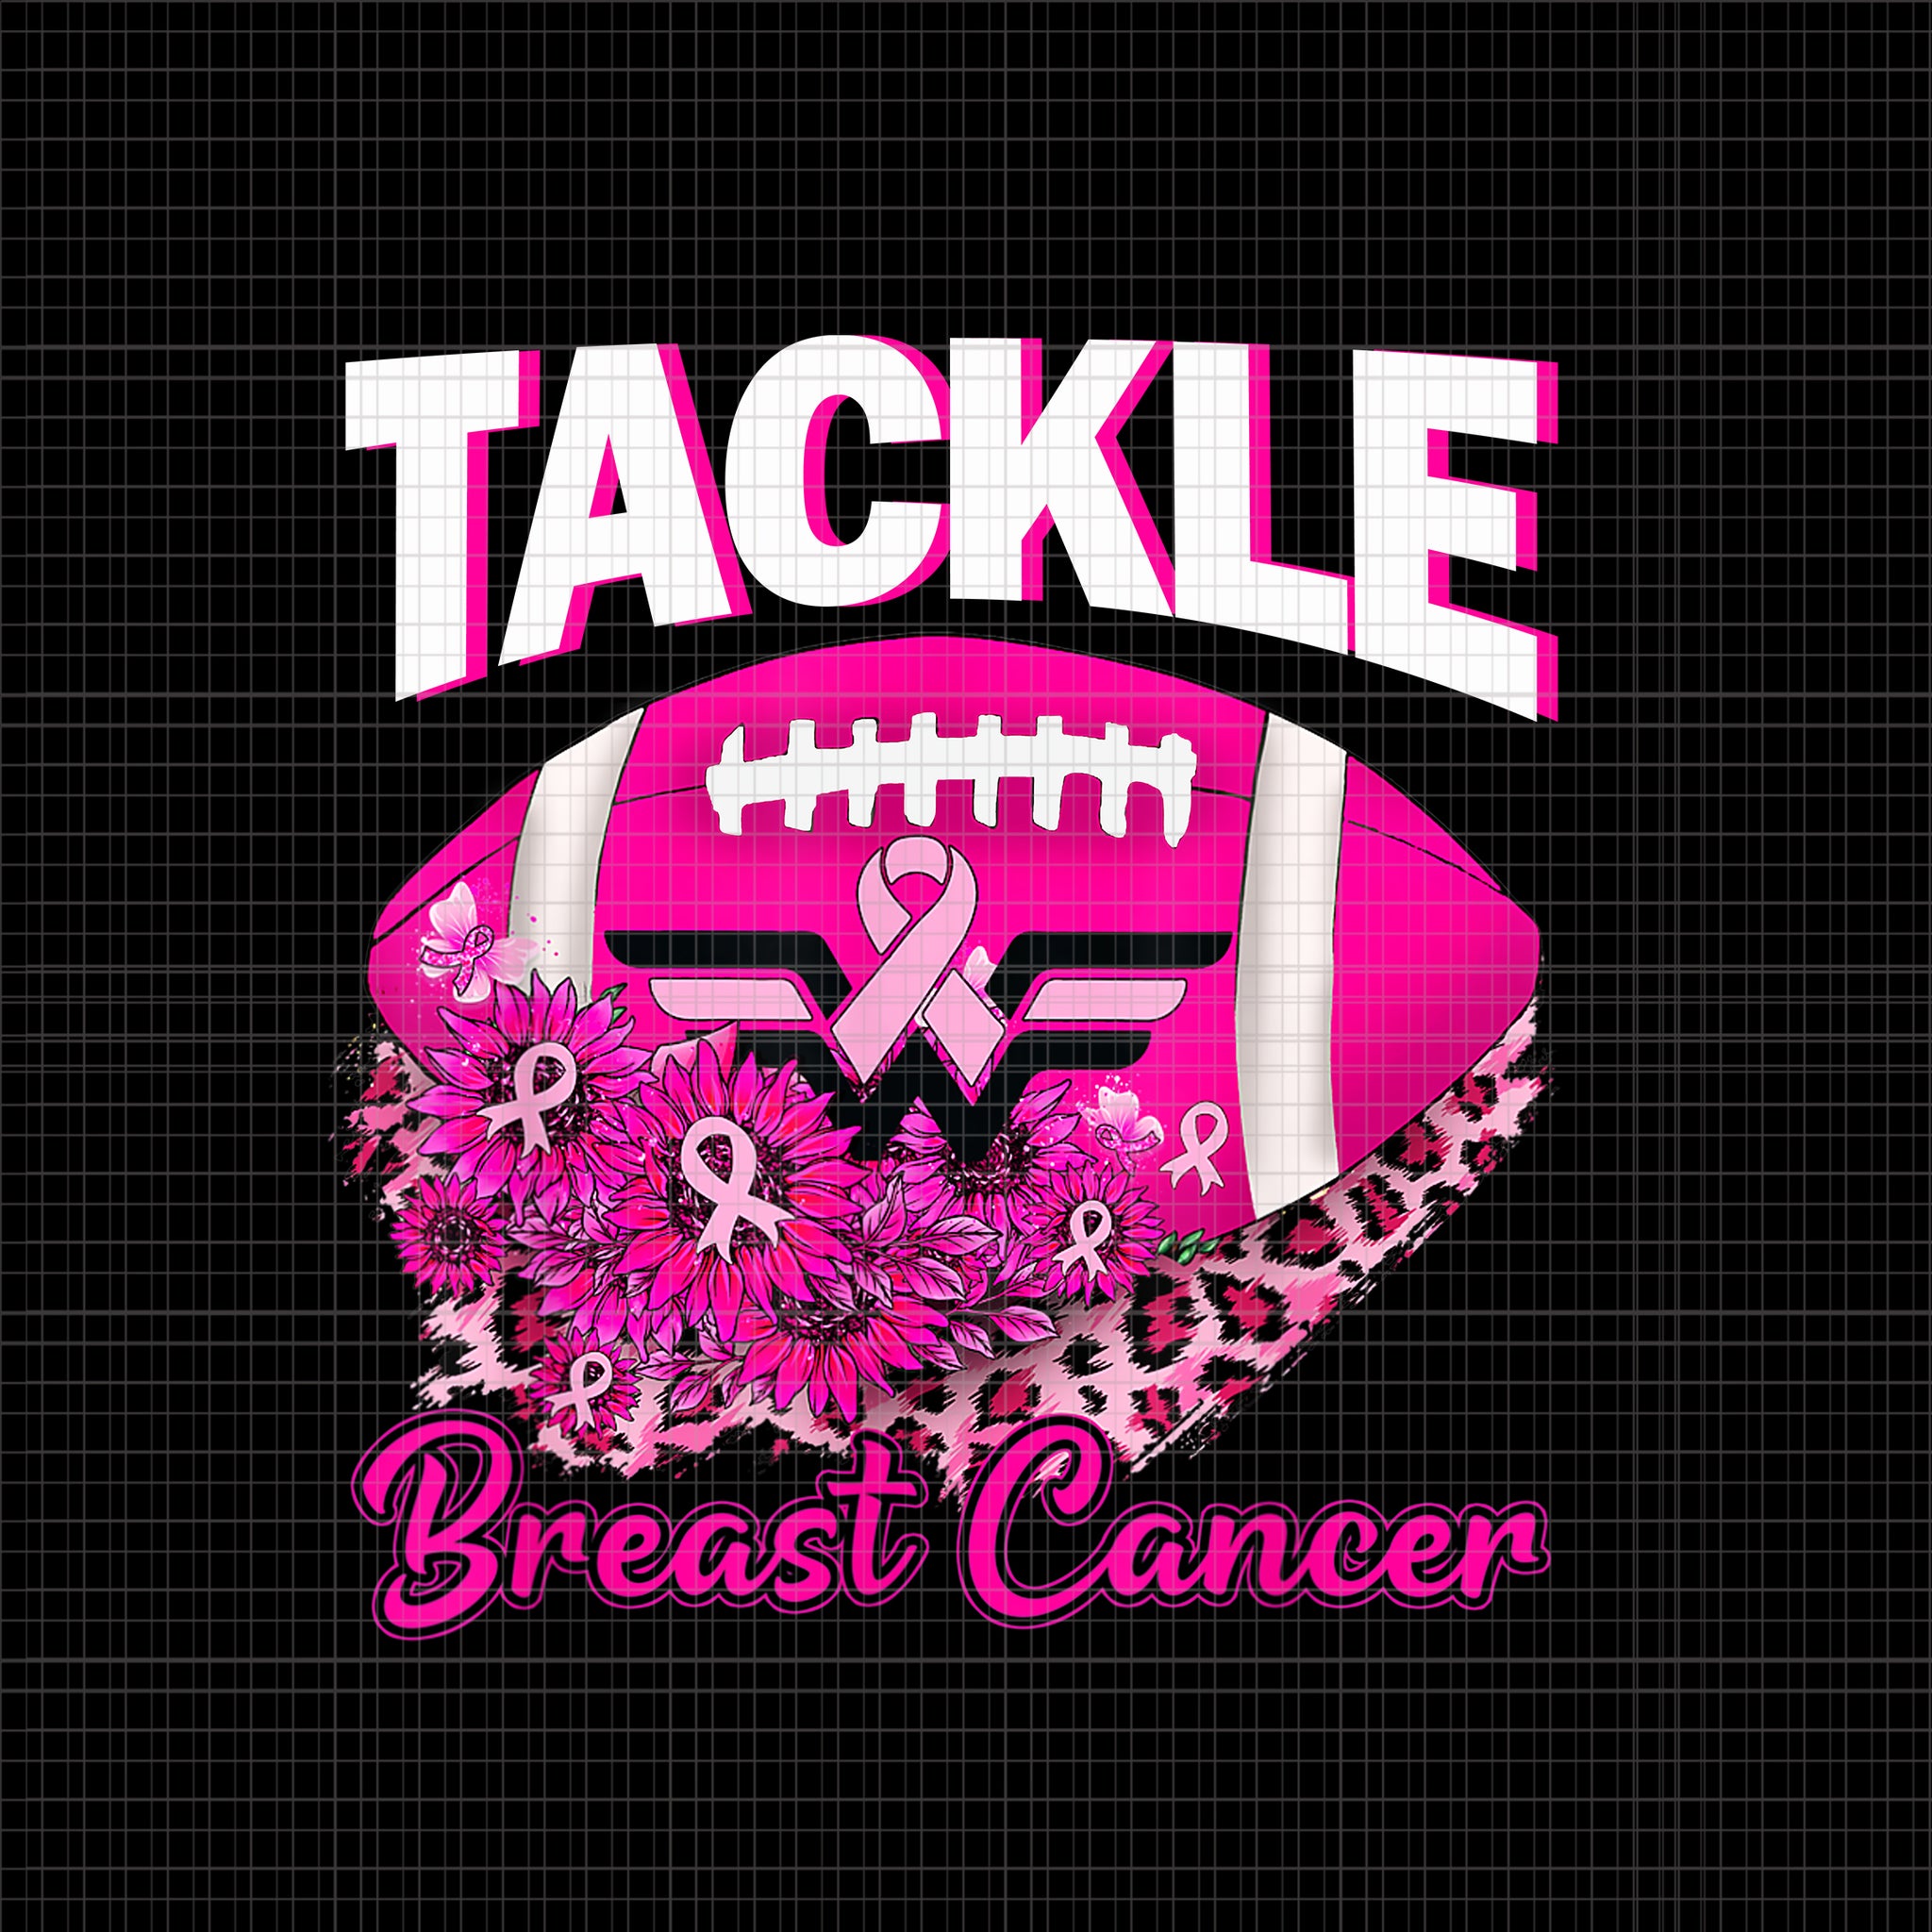 Tackle Breast Cancer Awareness Png, Tackle Cancer Football Png, Pink Ribbon Leopard Football Png, Pink Ribbon Png, Halloween Png, Autumn Png, Tackle Cancer Pink Ribbon Png